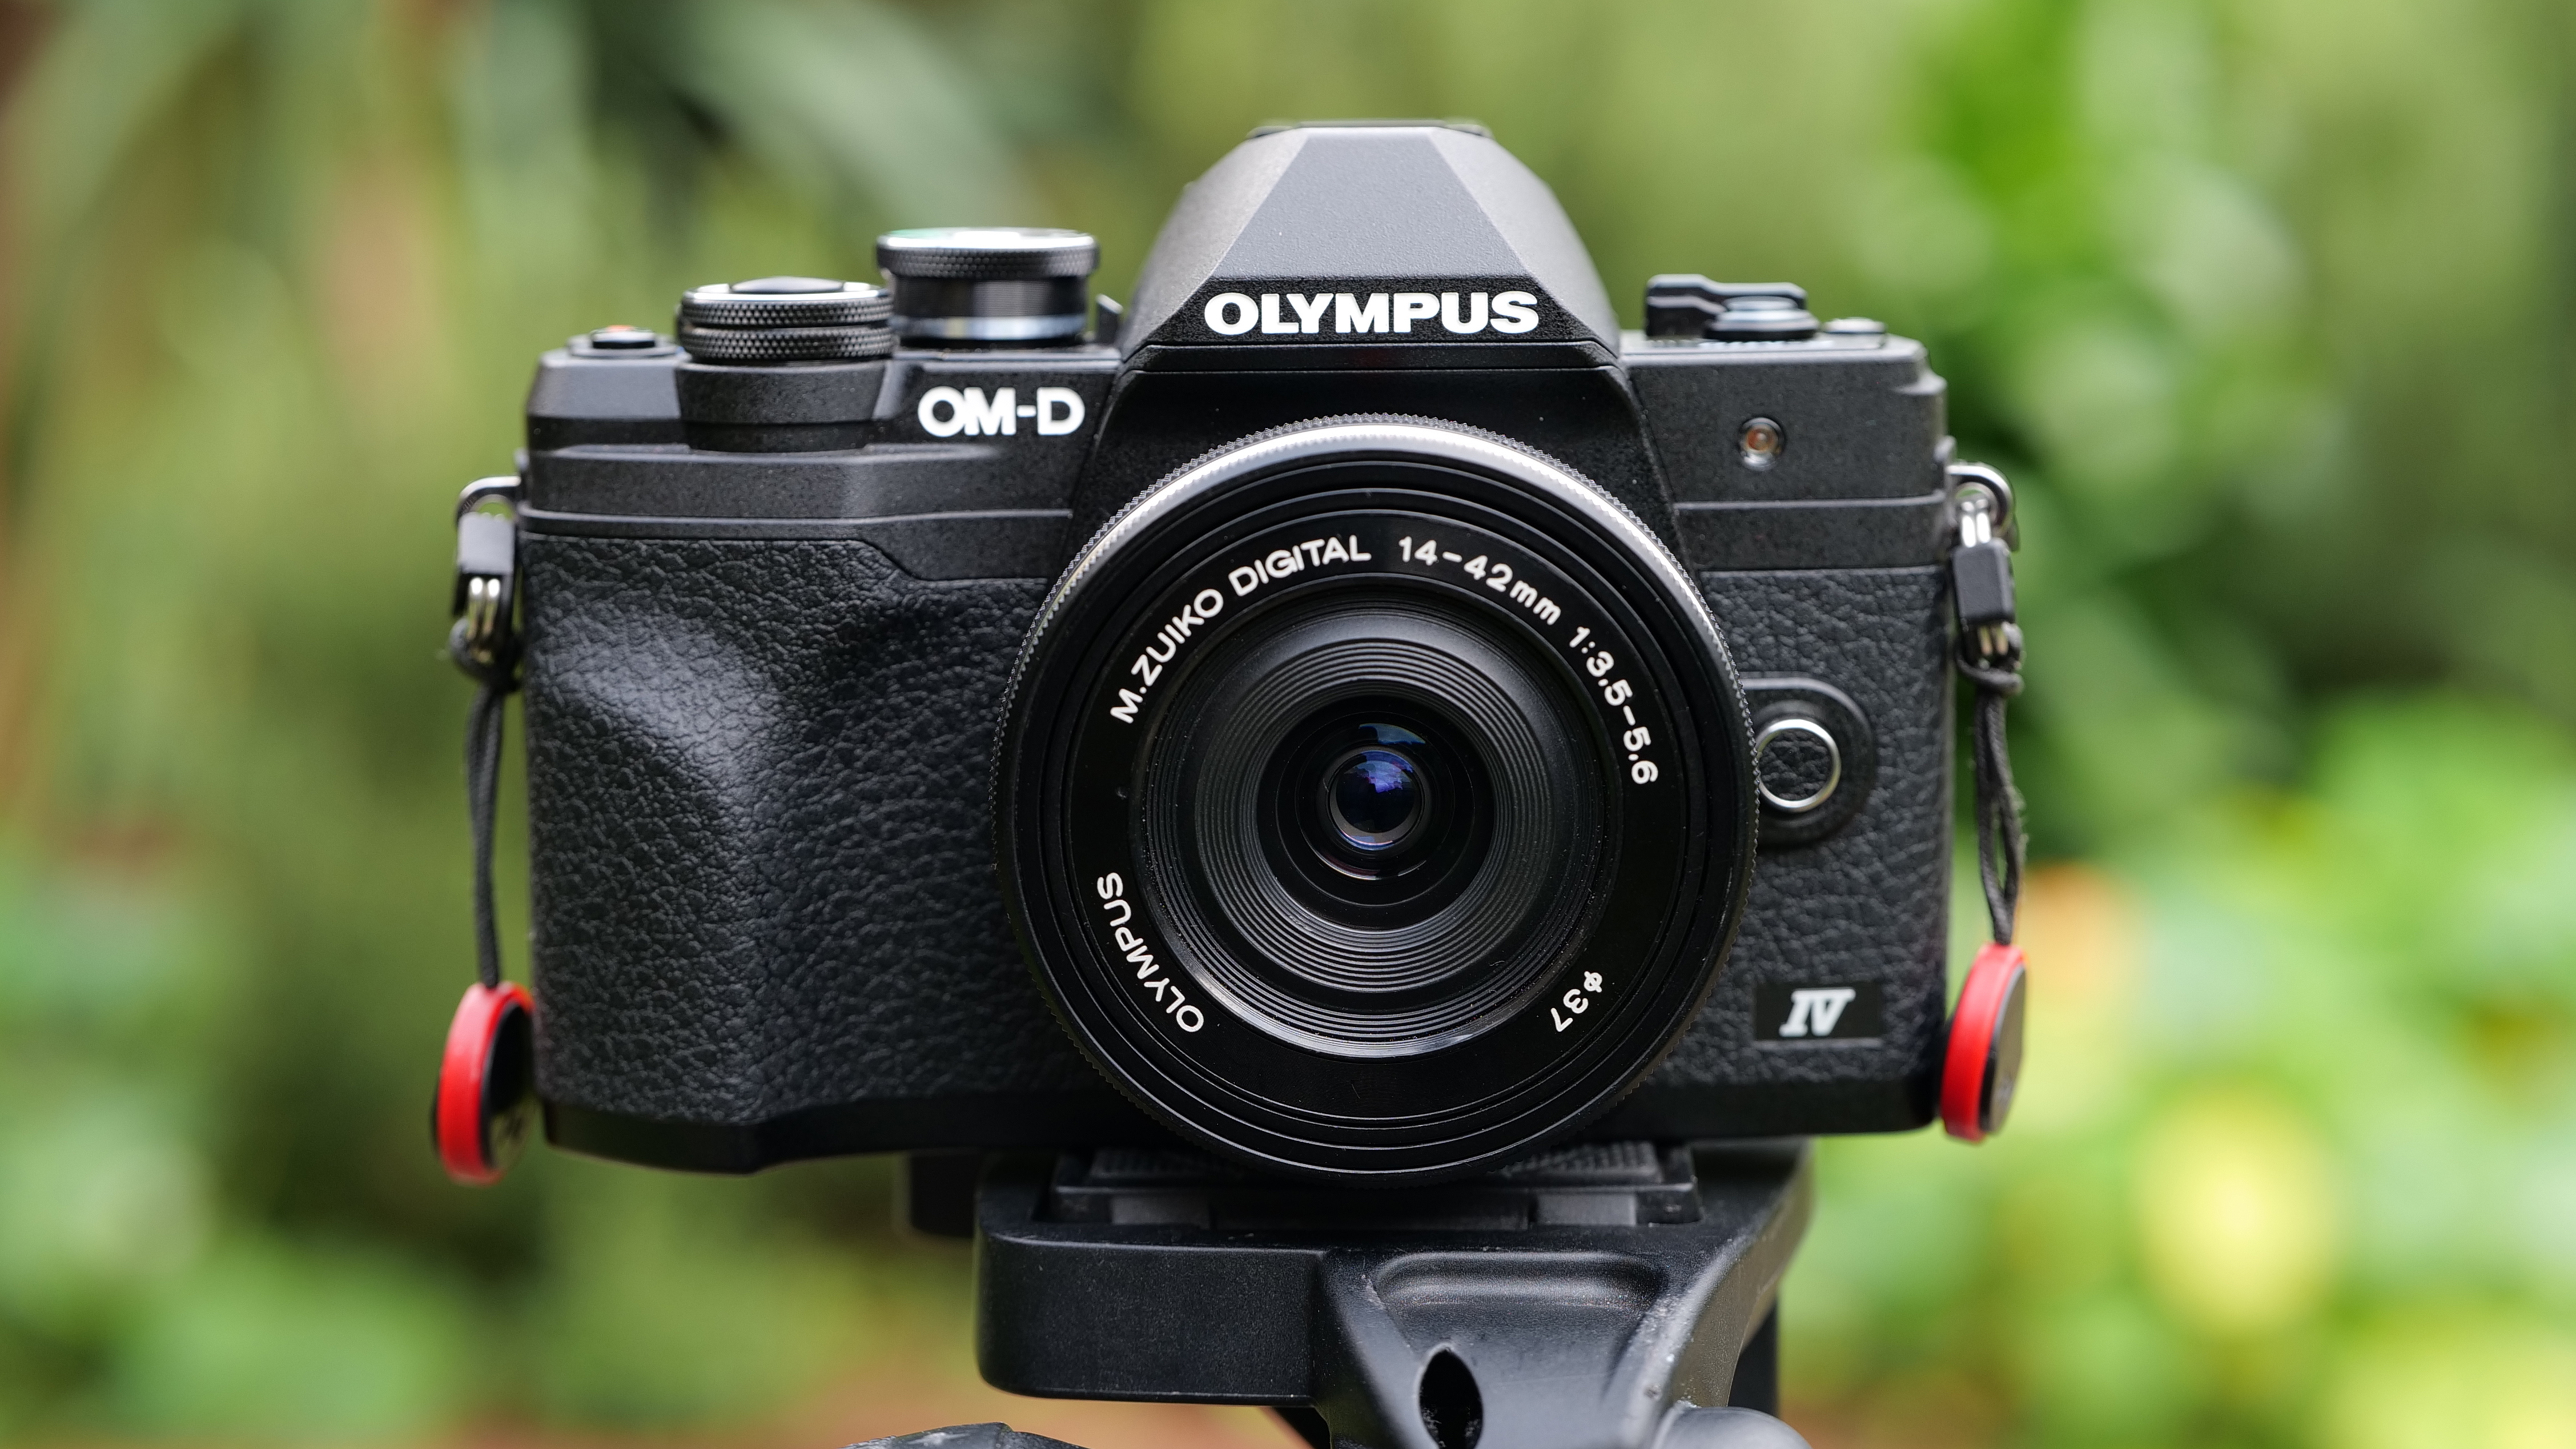 The Olympus OM-D E-M10 Mark IV mounted on a tripod in a garden.